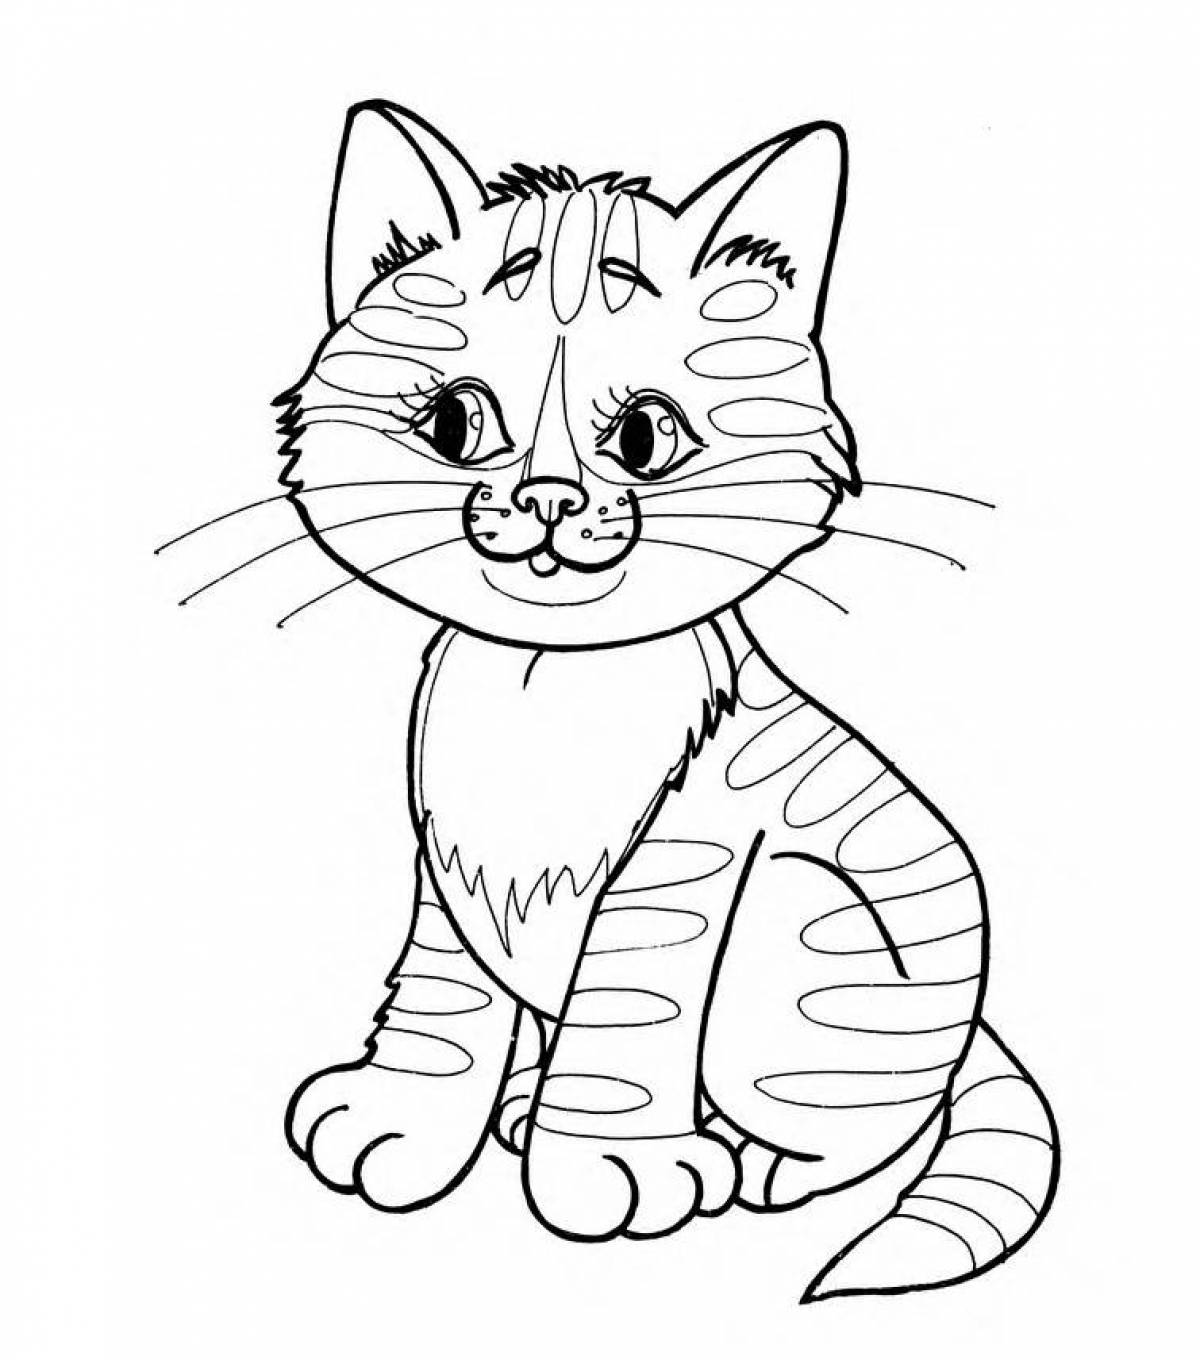 Adorable pets coloring book for kids 5-7 years old